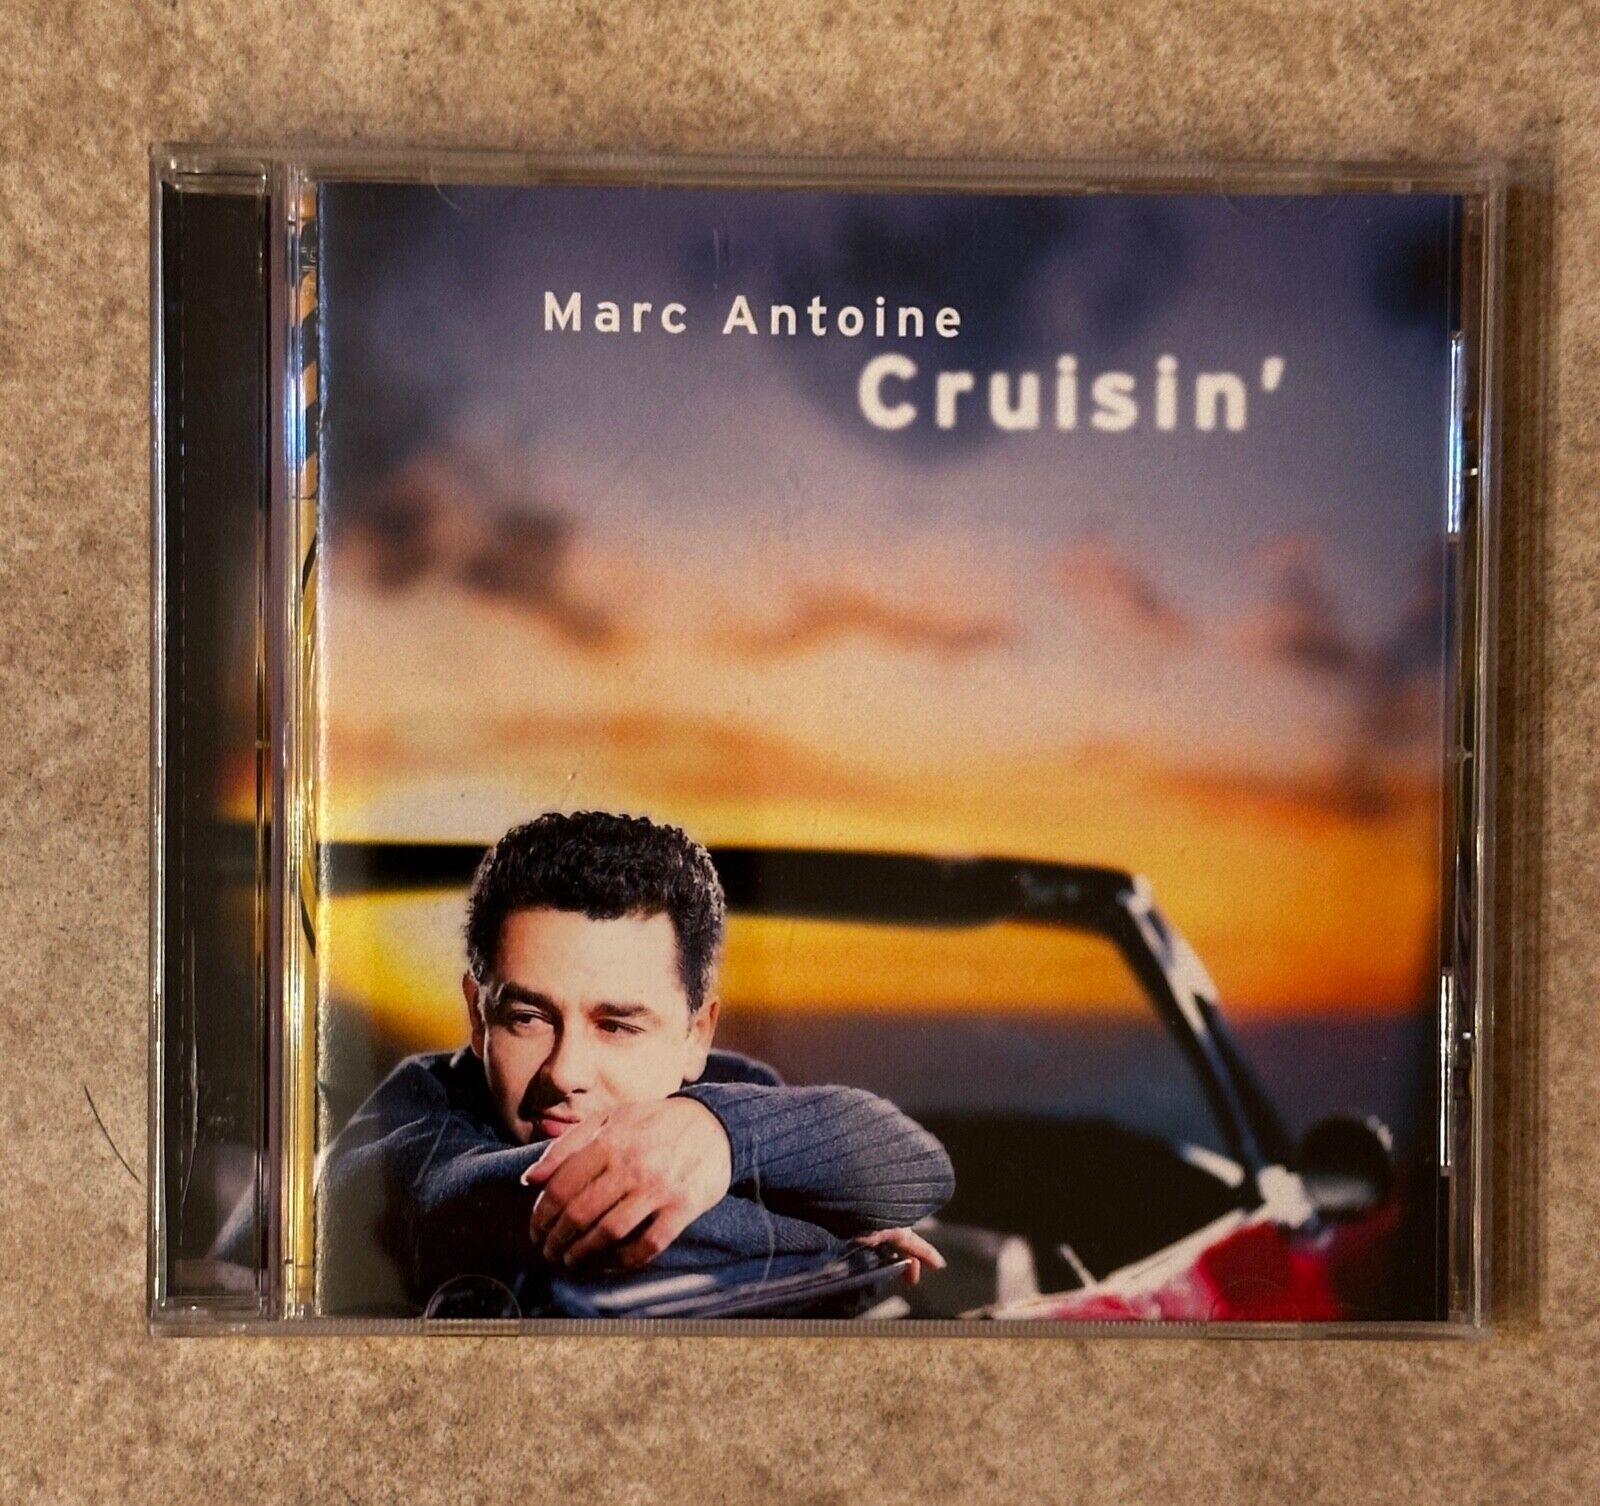 Cruisin' by Marc Antoine Guitar CD June 2001 GRP USA FREE SHIPPING